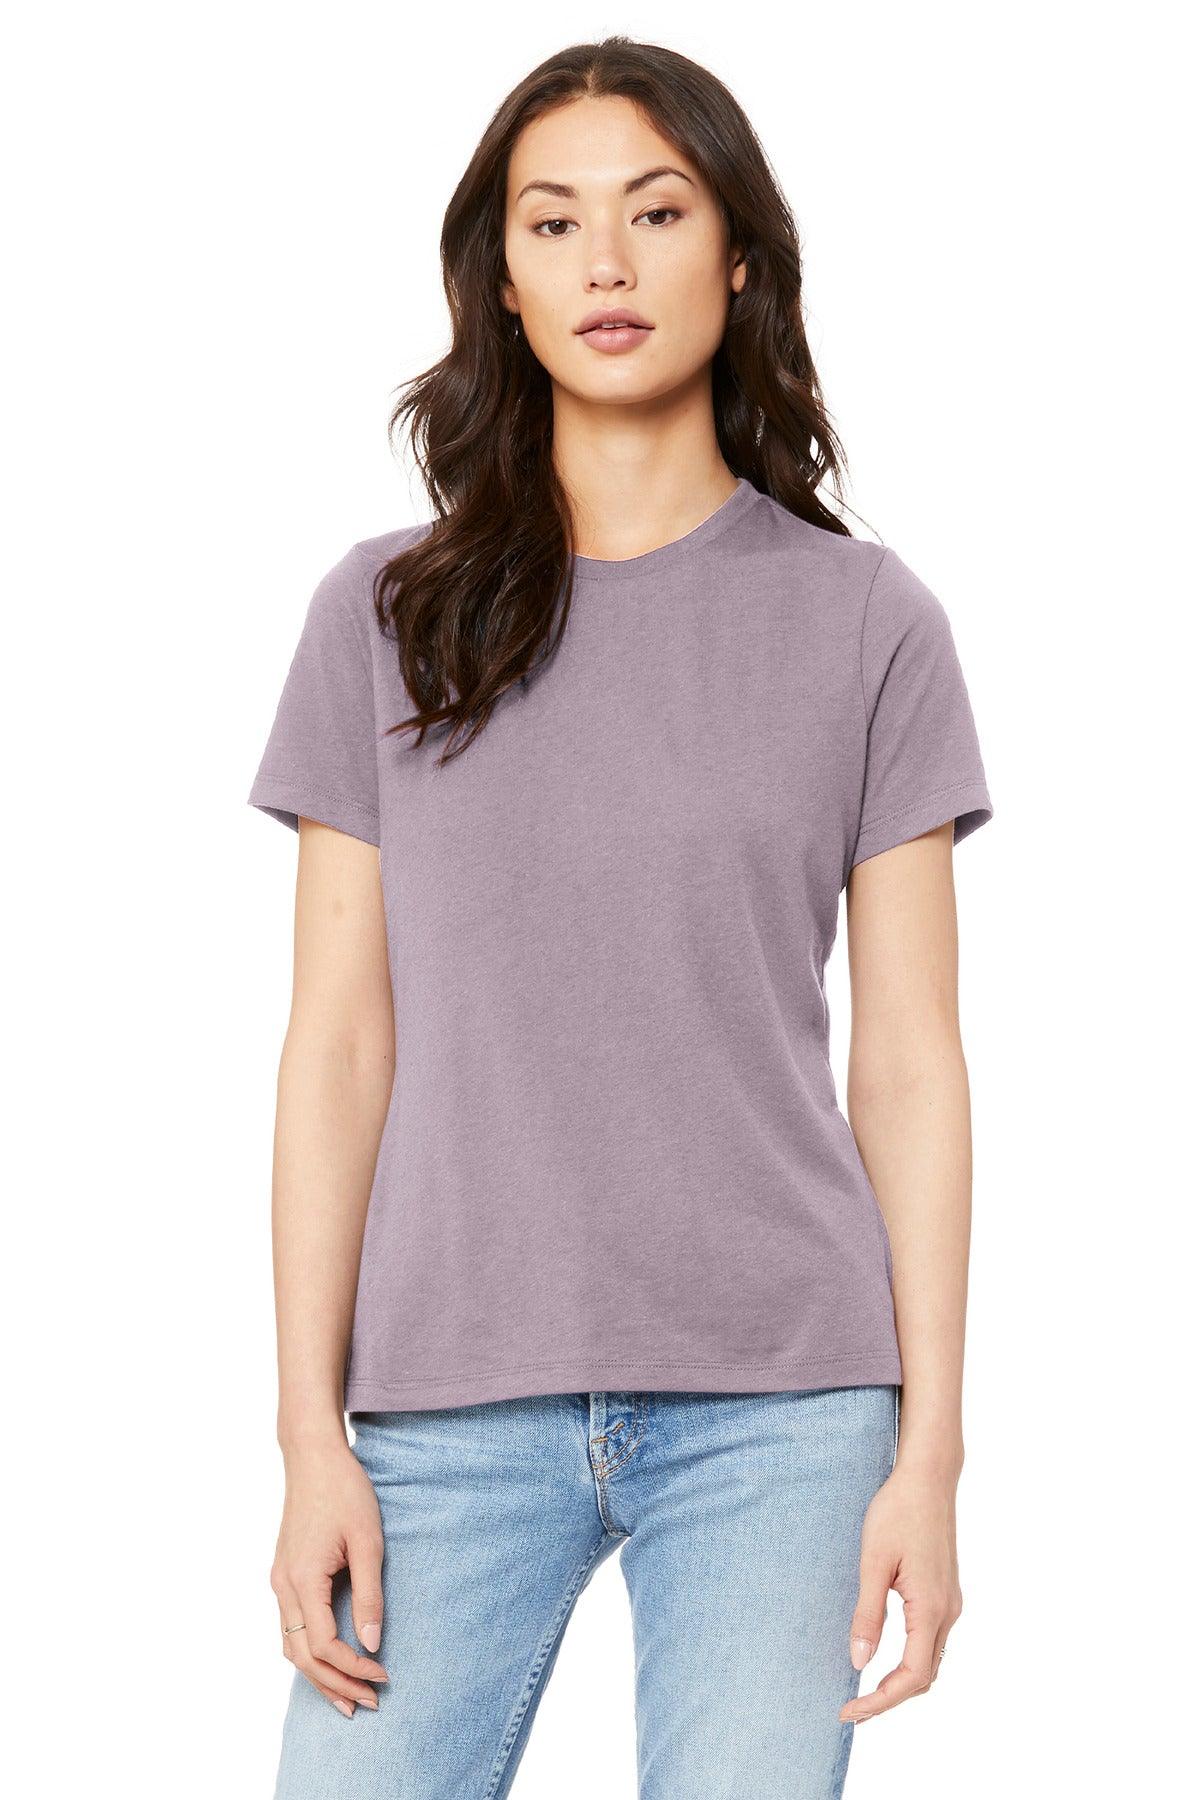 BELLA+CANVAS Women's Relaxed Jersey Short Sleeve Tee. BC6400 - Dresses Max